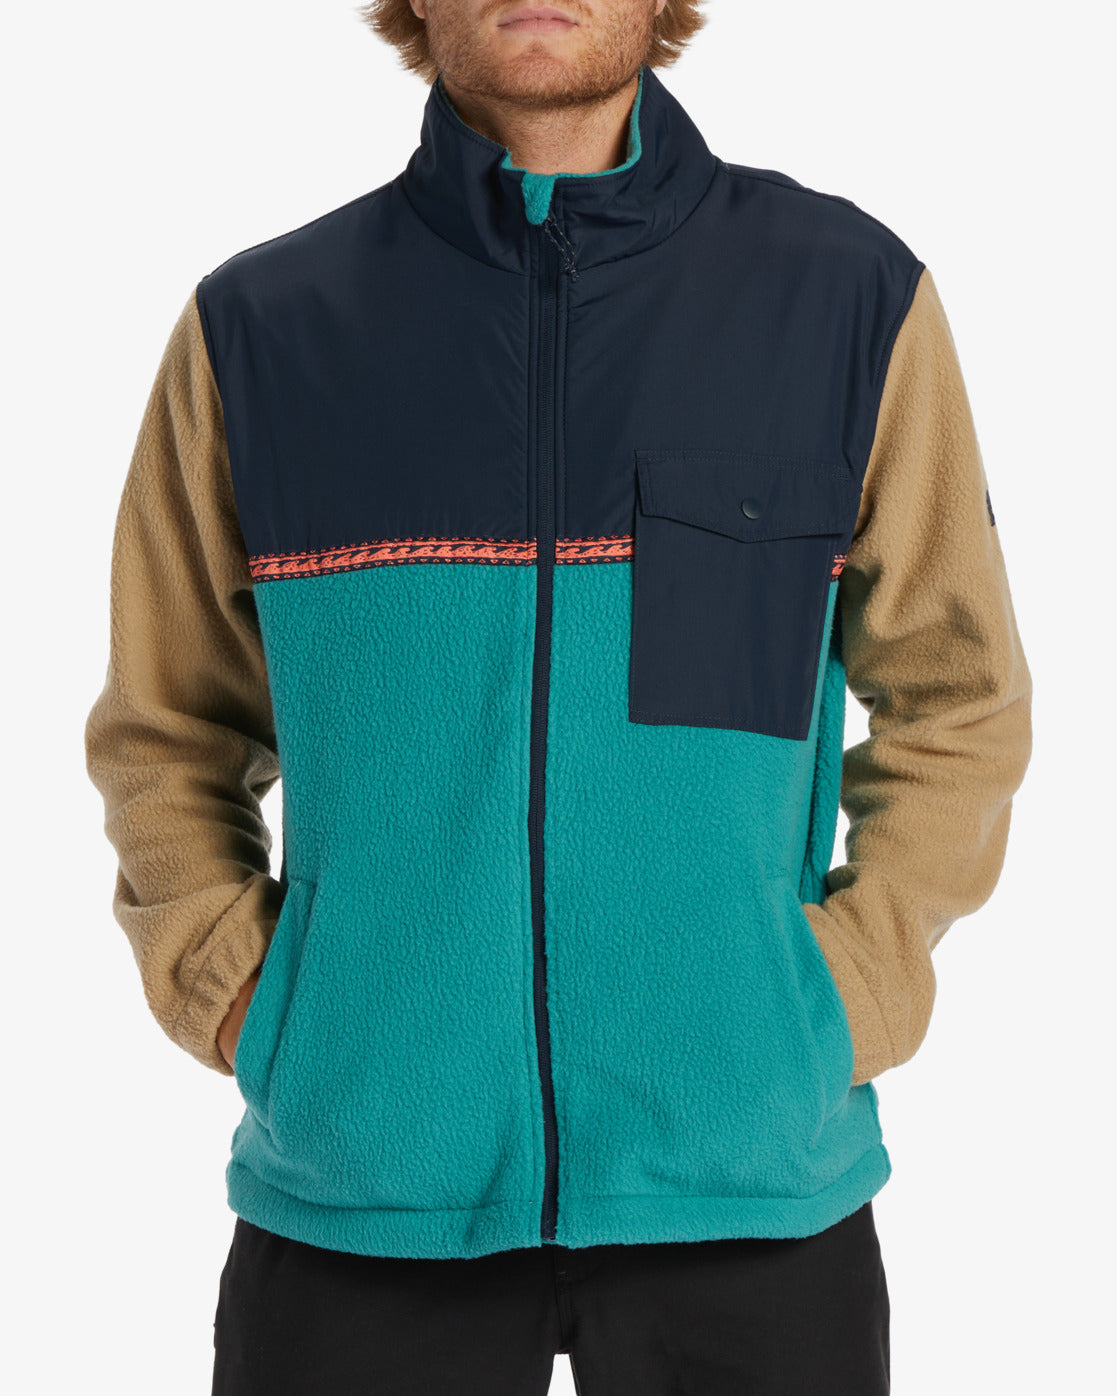 A/Div Boundary Trail Zip-Up Fleece - Pacific